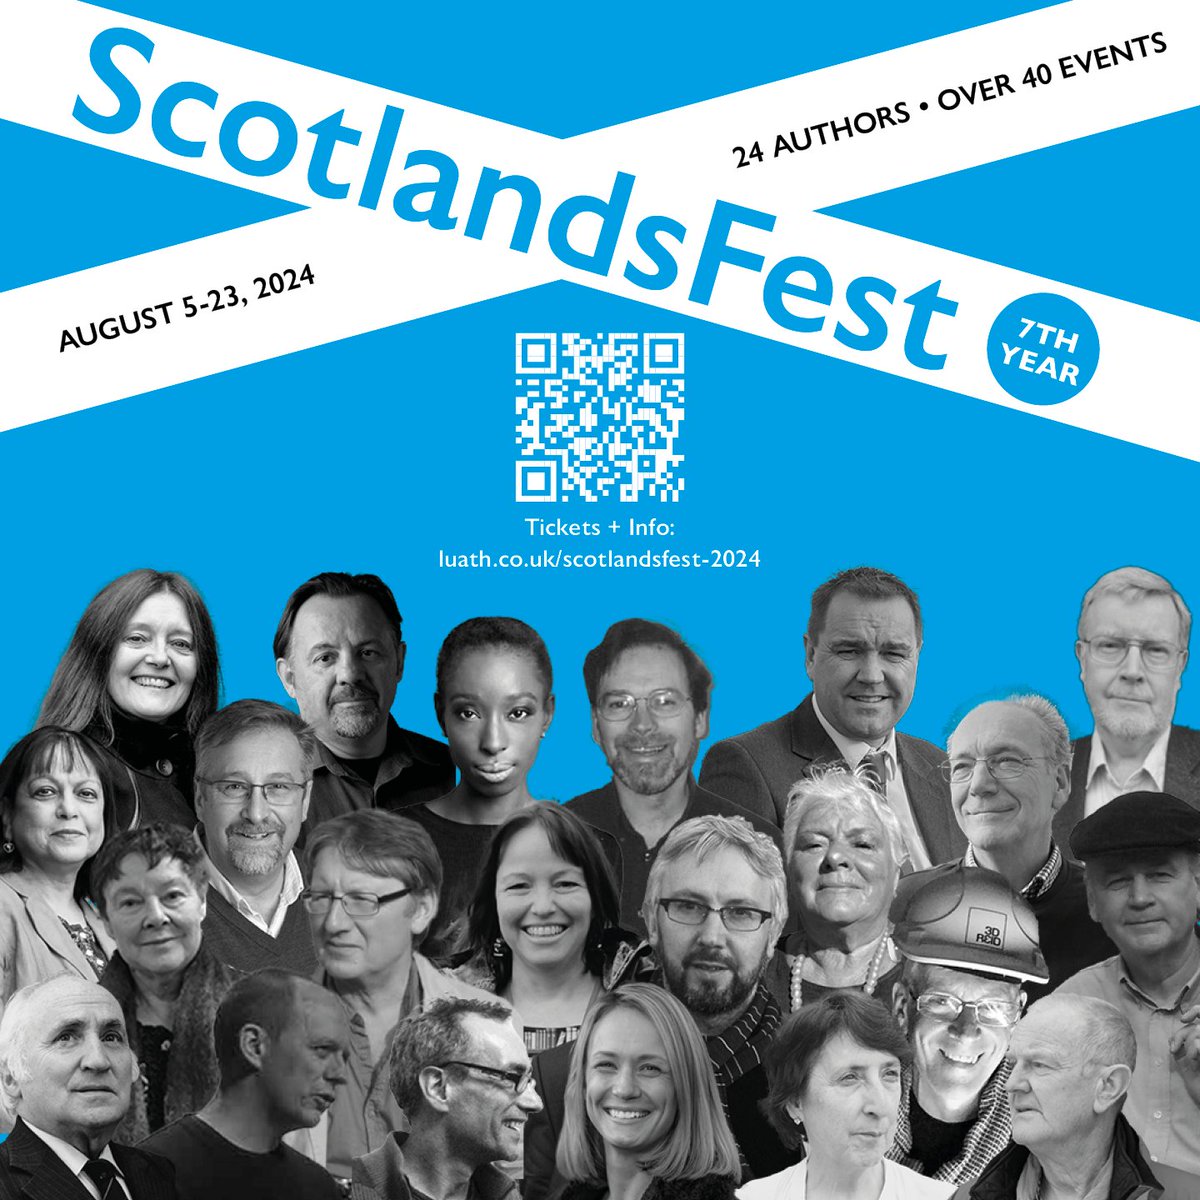 Looks like I'm going to THE FRINGE! 🤸‍♀️📚😍💪 1. A family event introducing youngsters to #MaryQueenofScots 2. An event aimed at adults featuring #ForthBridge stories collected during my author residency! luath.co.uk/scotlandsfest-… @TheForthBridges @edfests @edbookfest